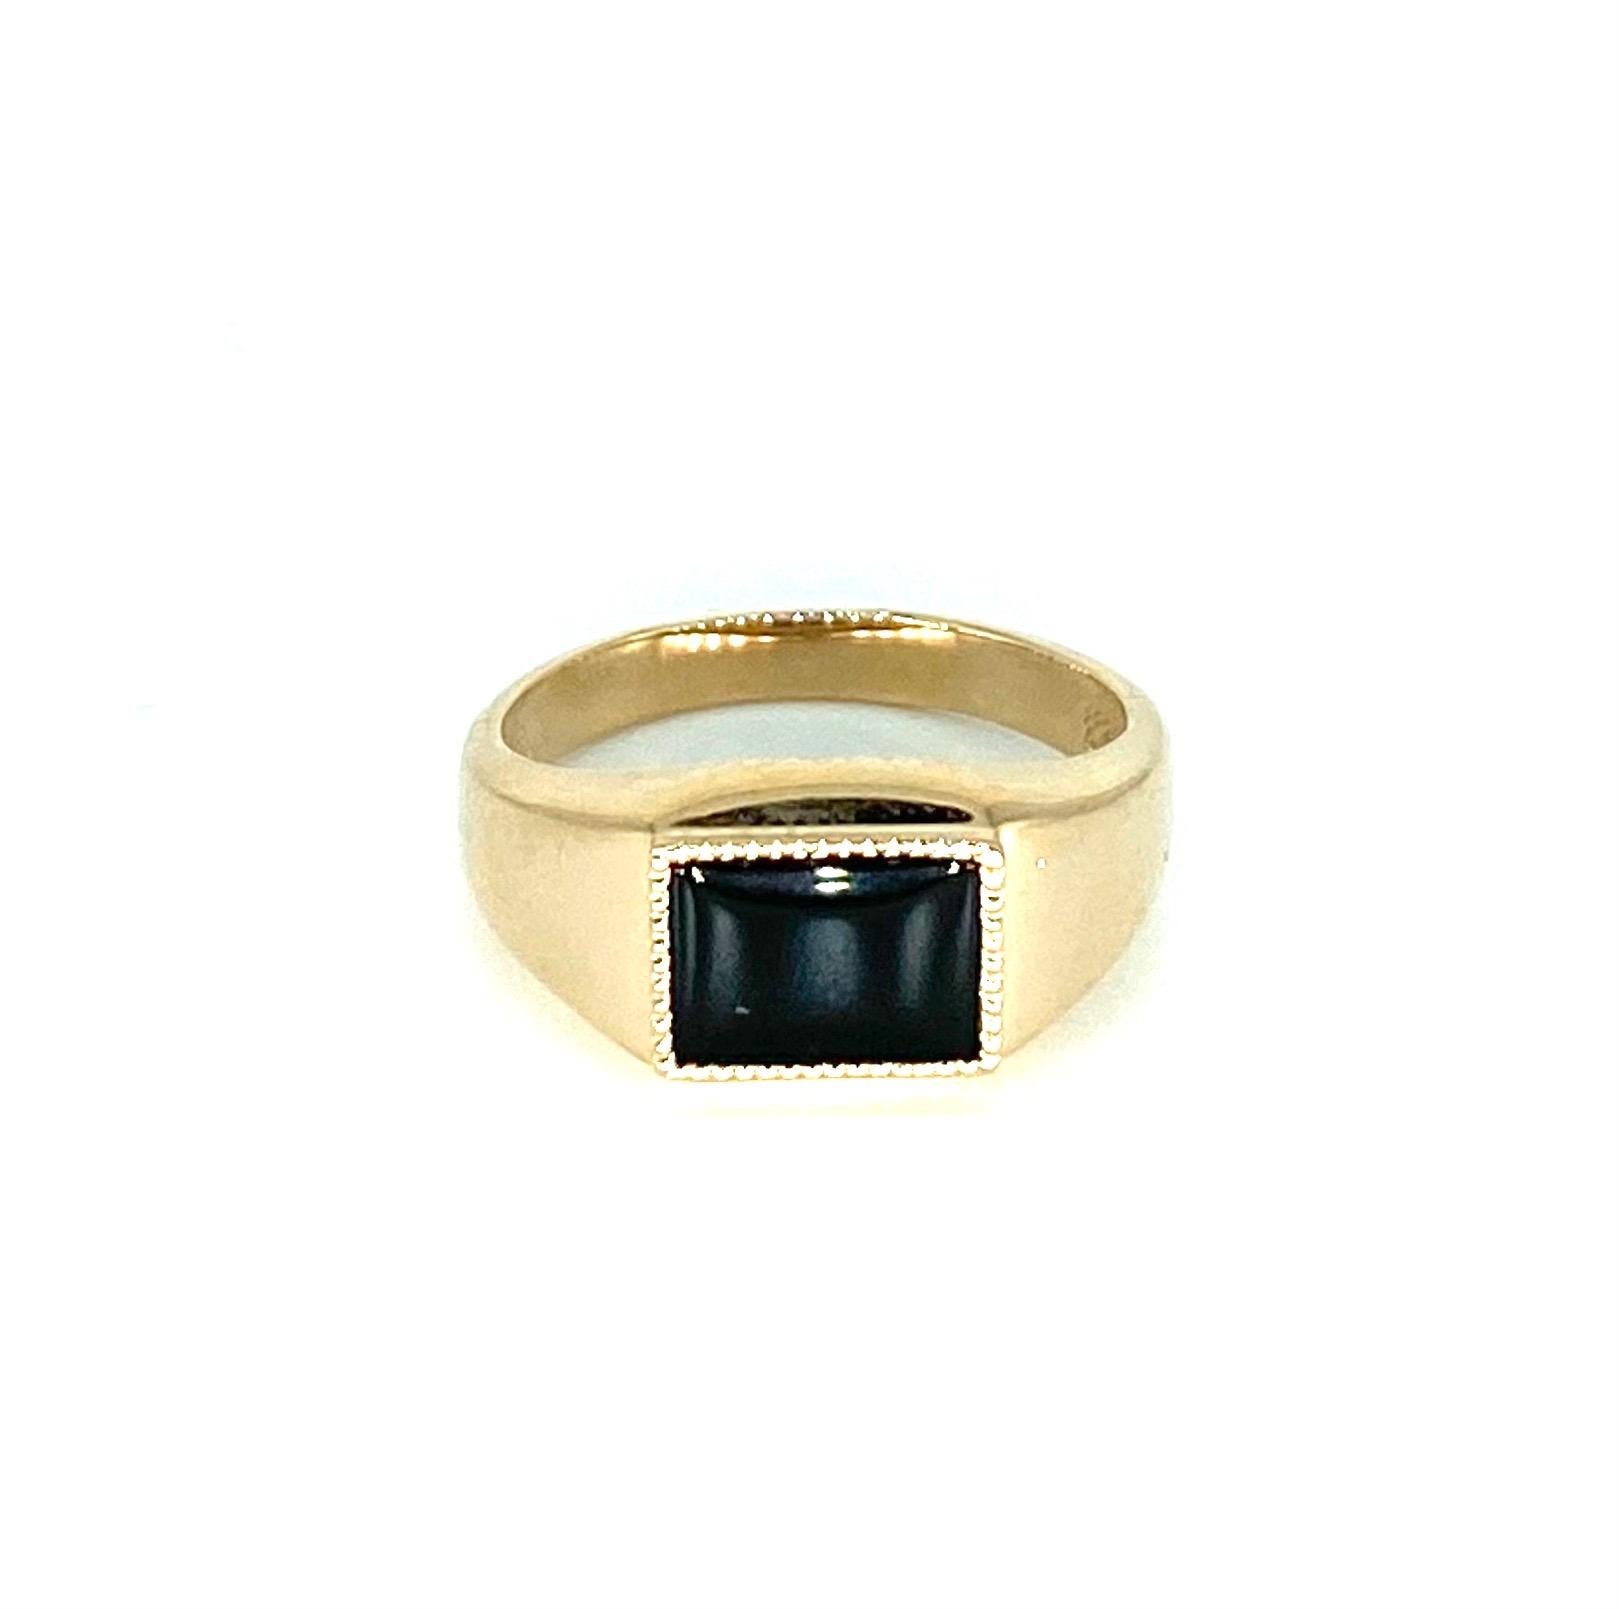 Square Cut Retro Russian Gold Mne's Onyx Signet Ring 14k Rose Gold, Circa 1950s For Sale